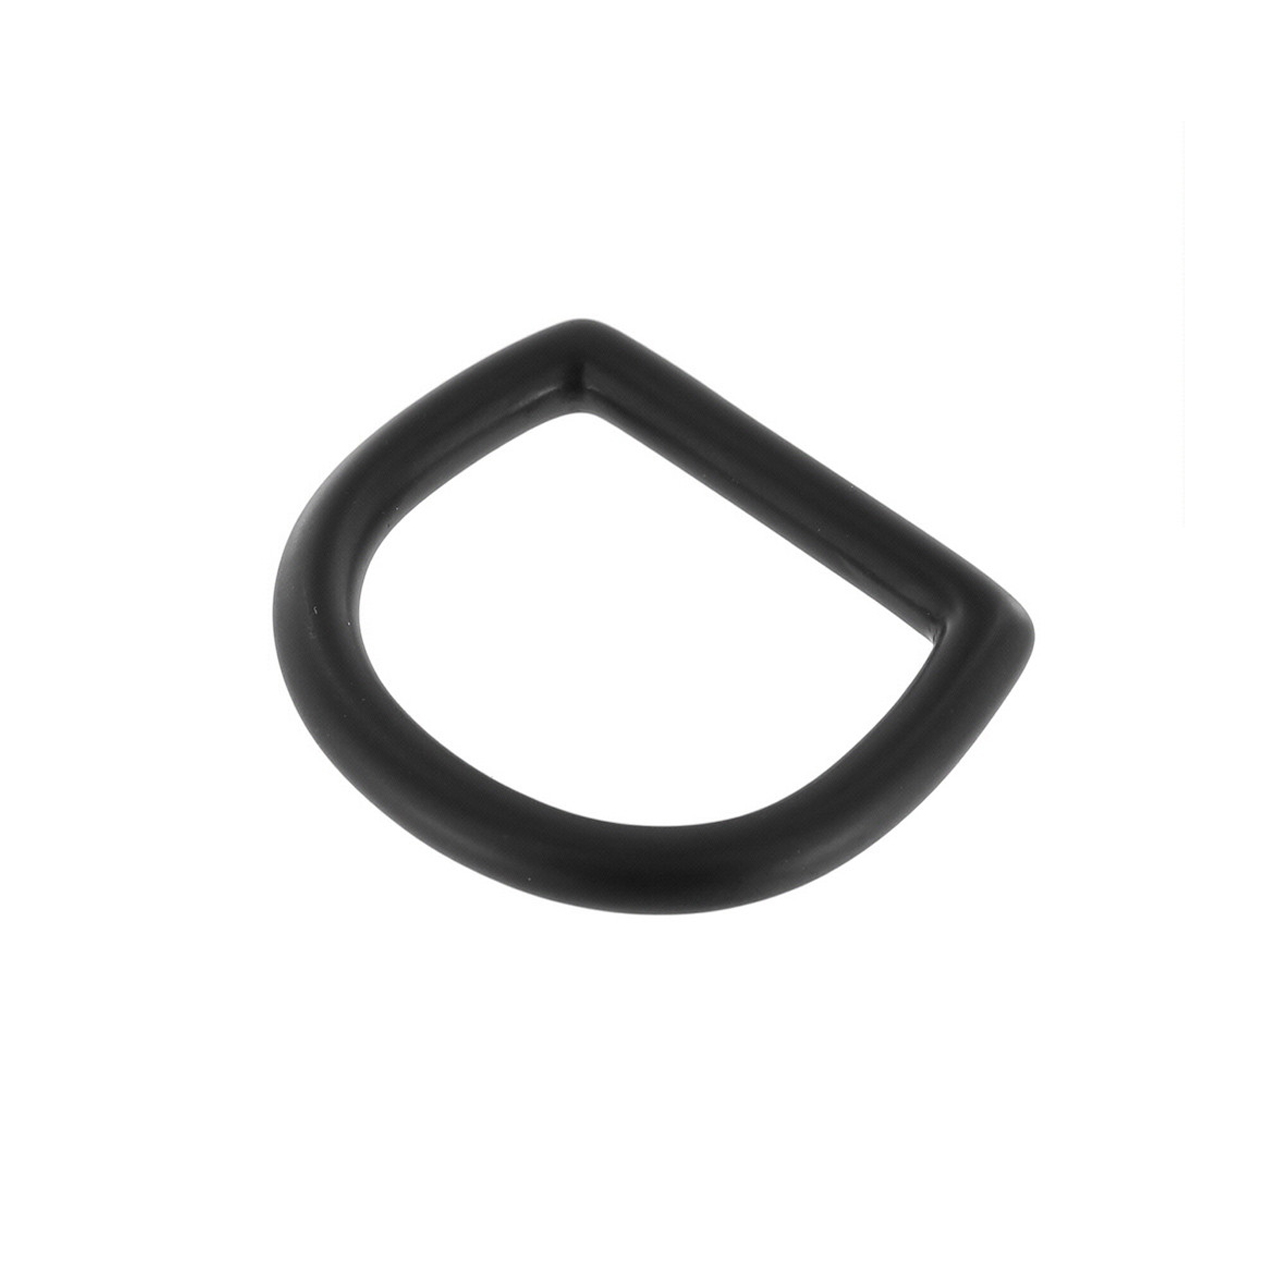 Metal D Ring Non Welded D-Rings Electroplated Black 1.25 Inch (100